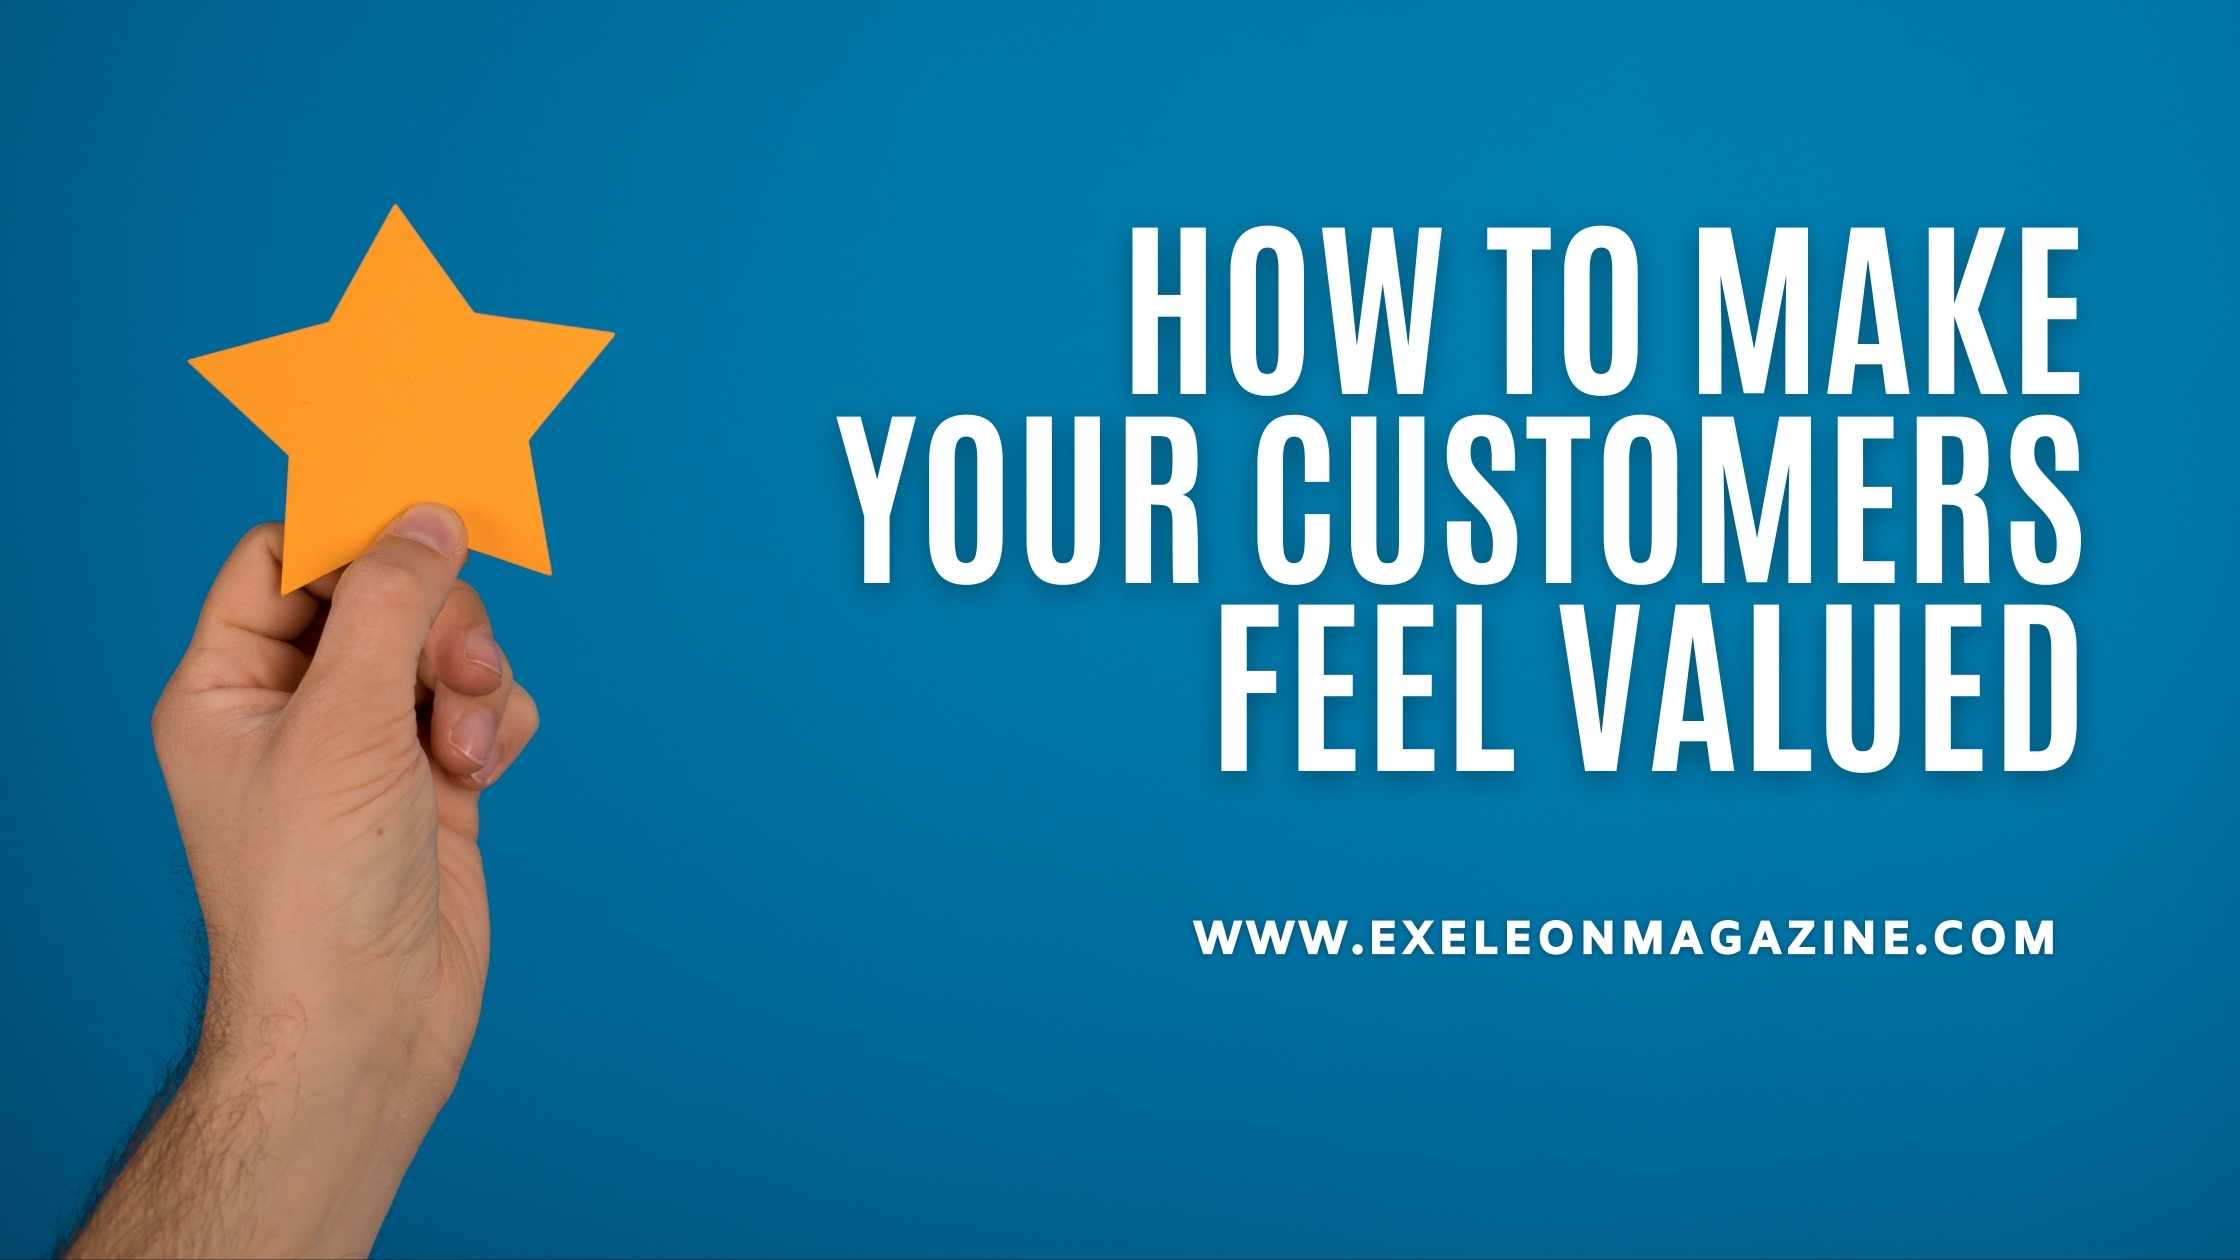 How To Make Your Customers Feel Valued